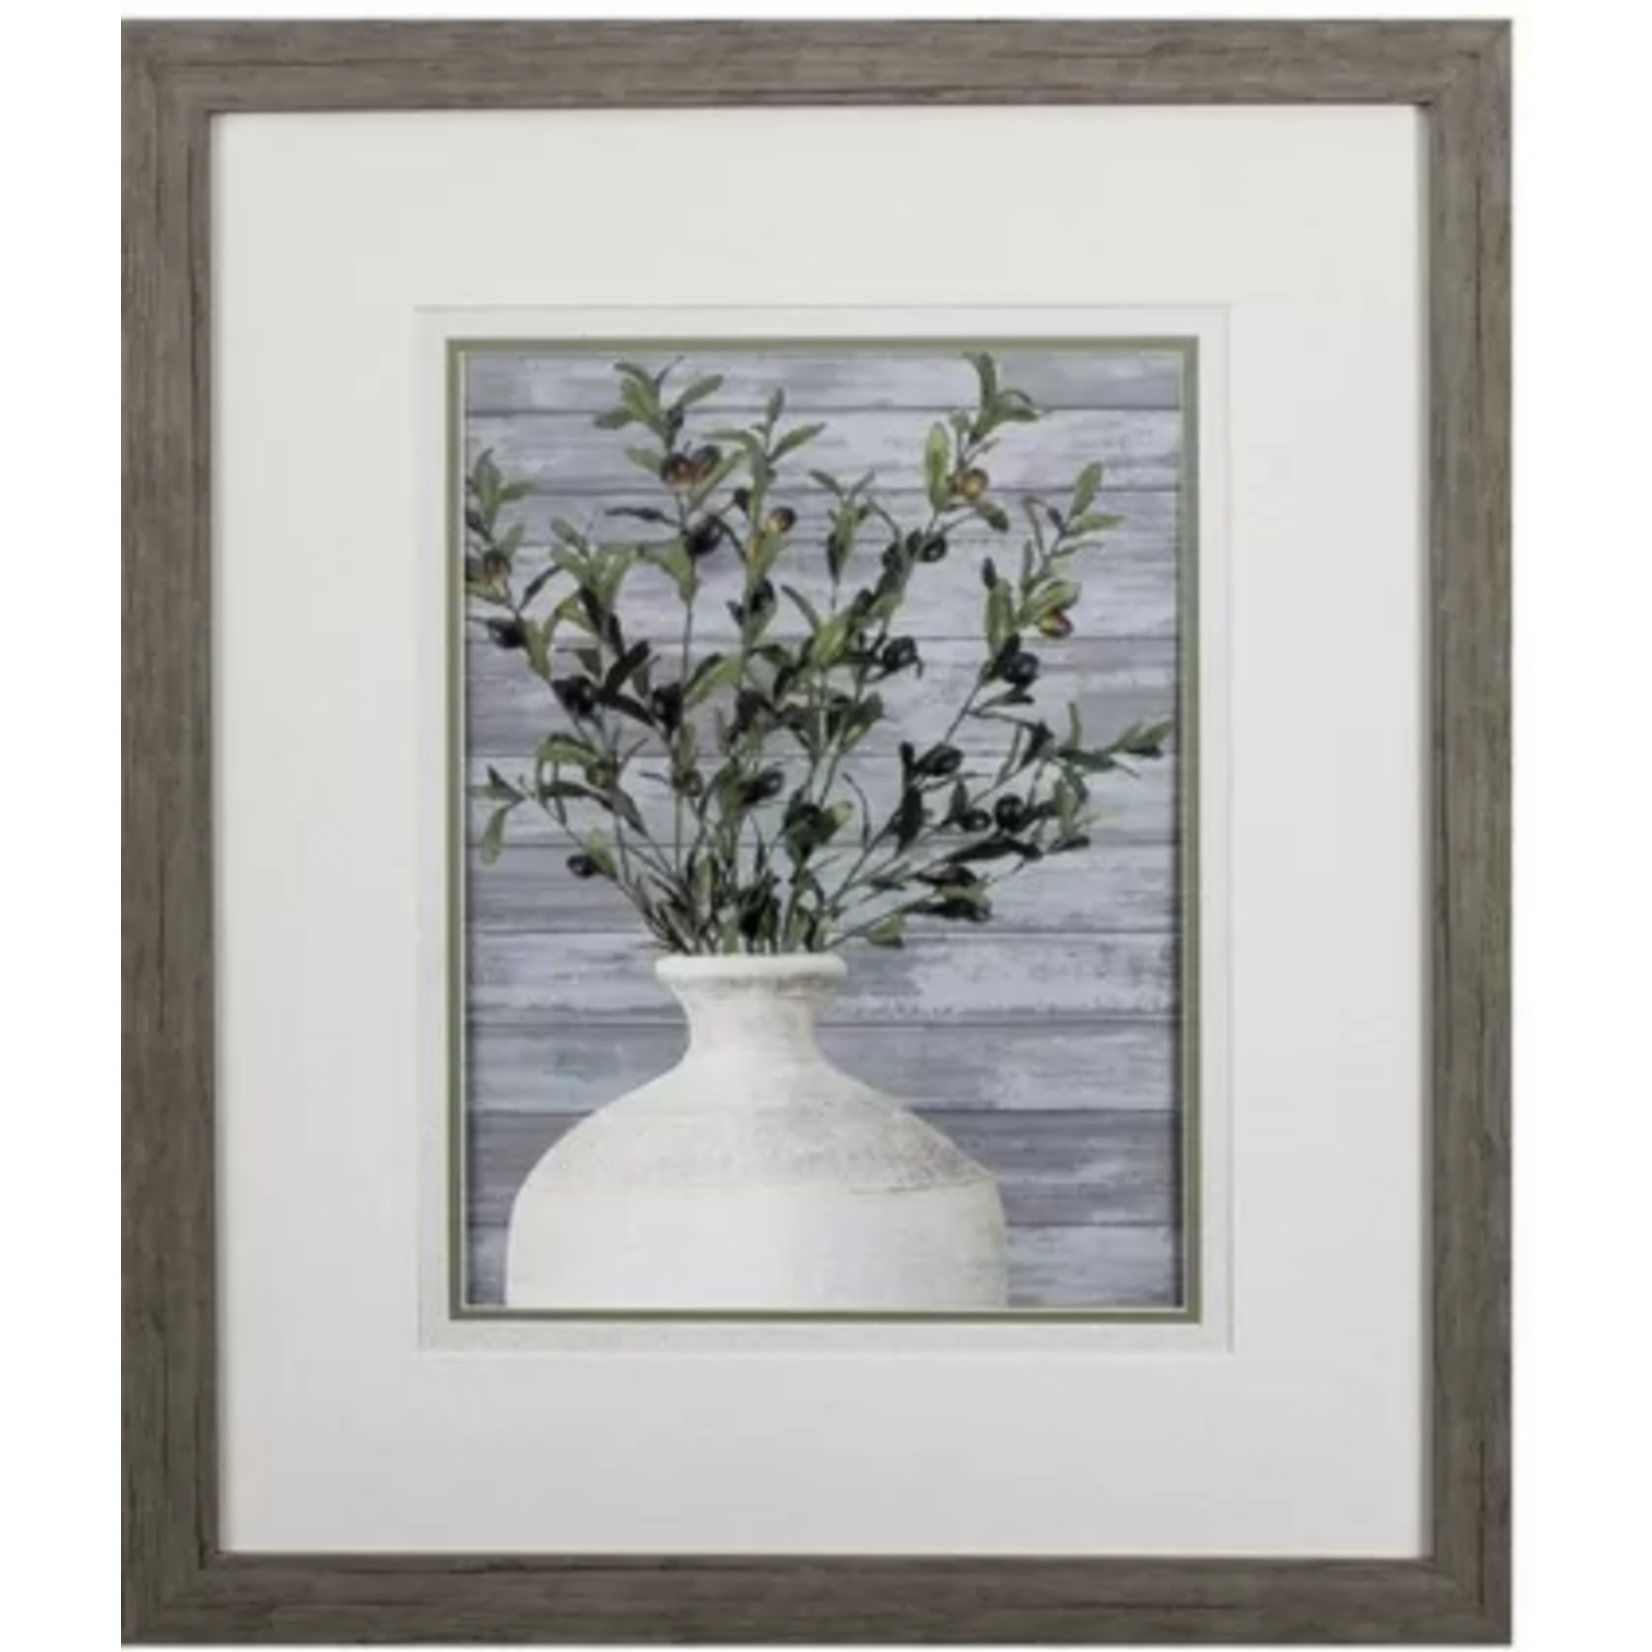 PROPAC IMAGES WHITE VASE DOUBLE MATTED IMAGES